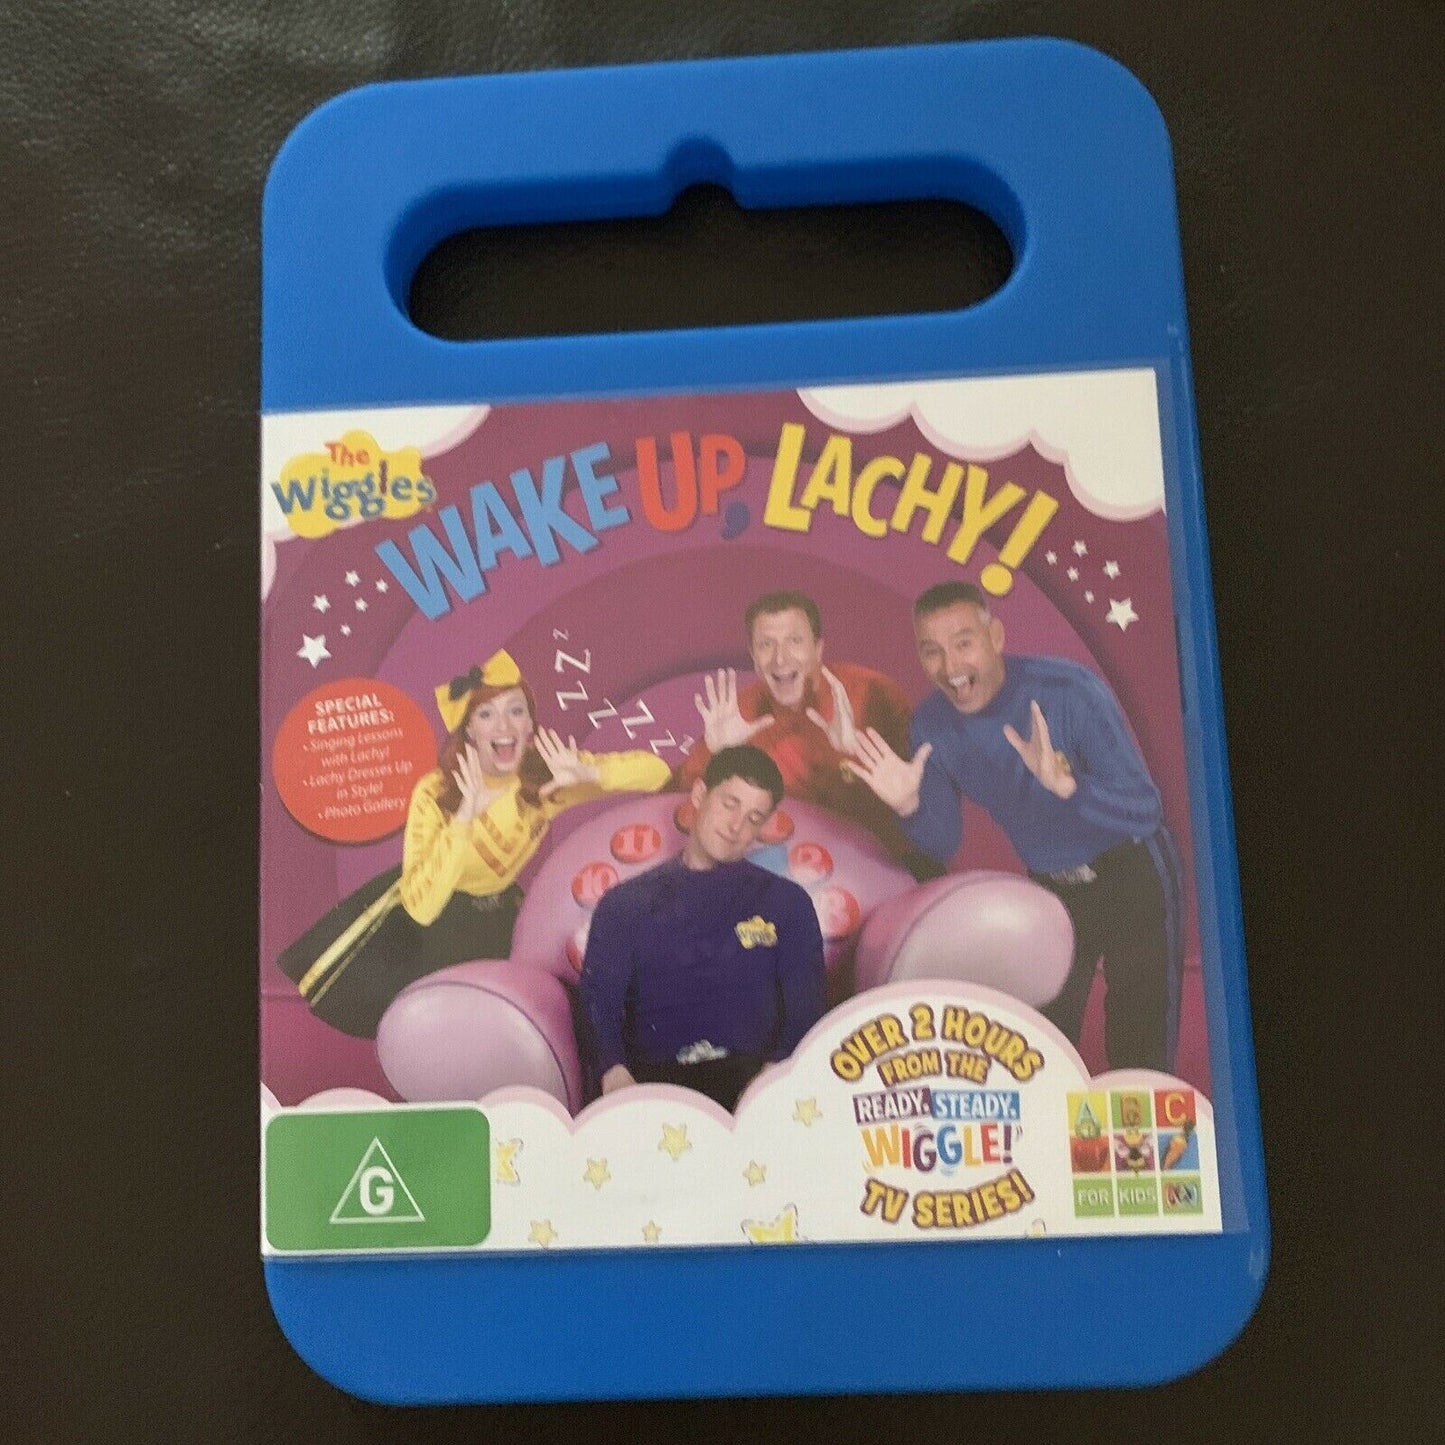 The Wiggles - Wake Up Lachy! & Meet The Orchestra (DVD, 2-Disc)